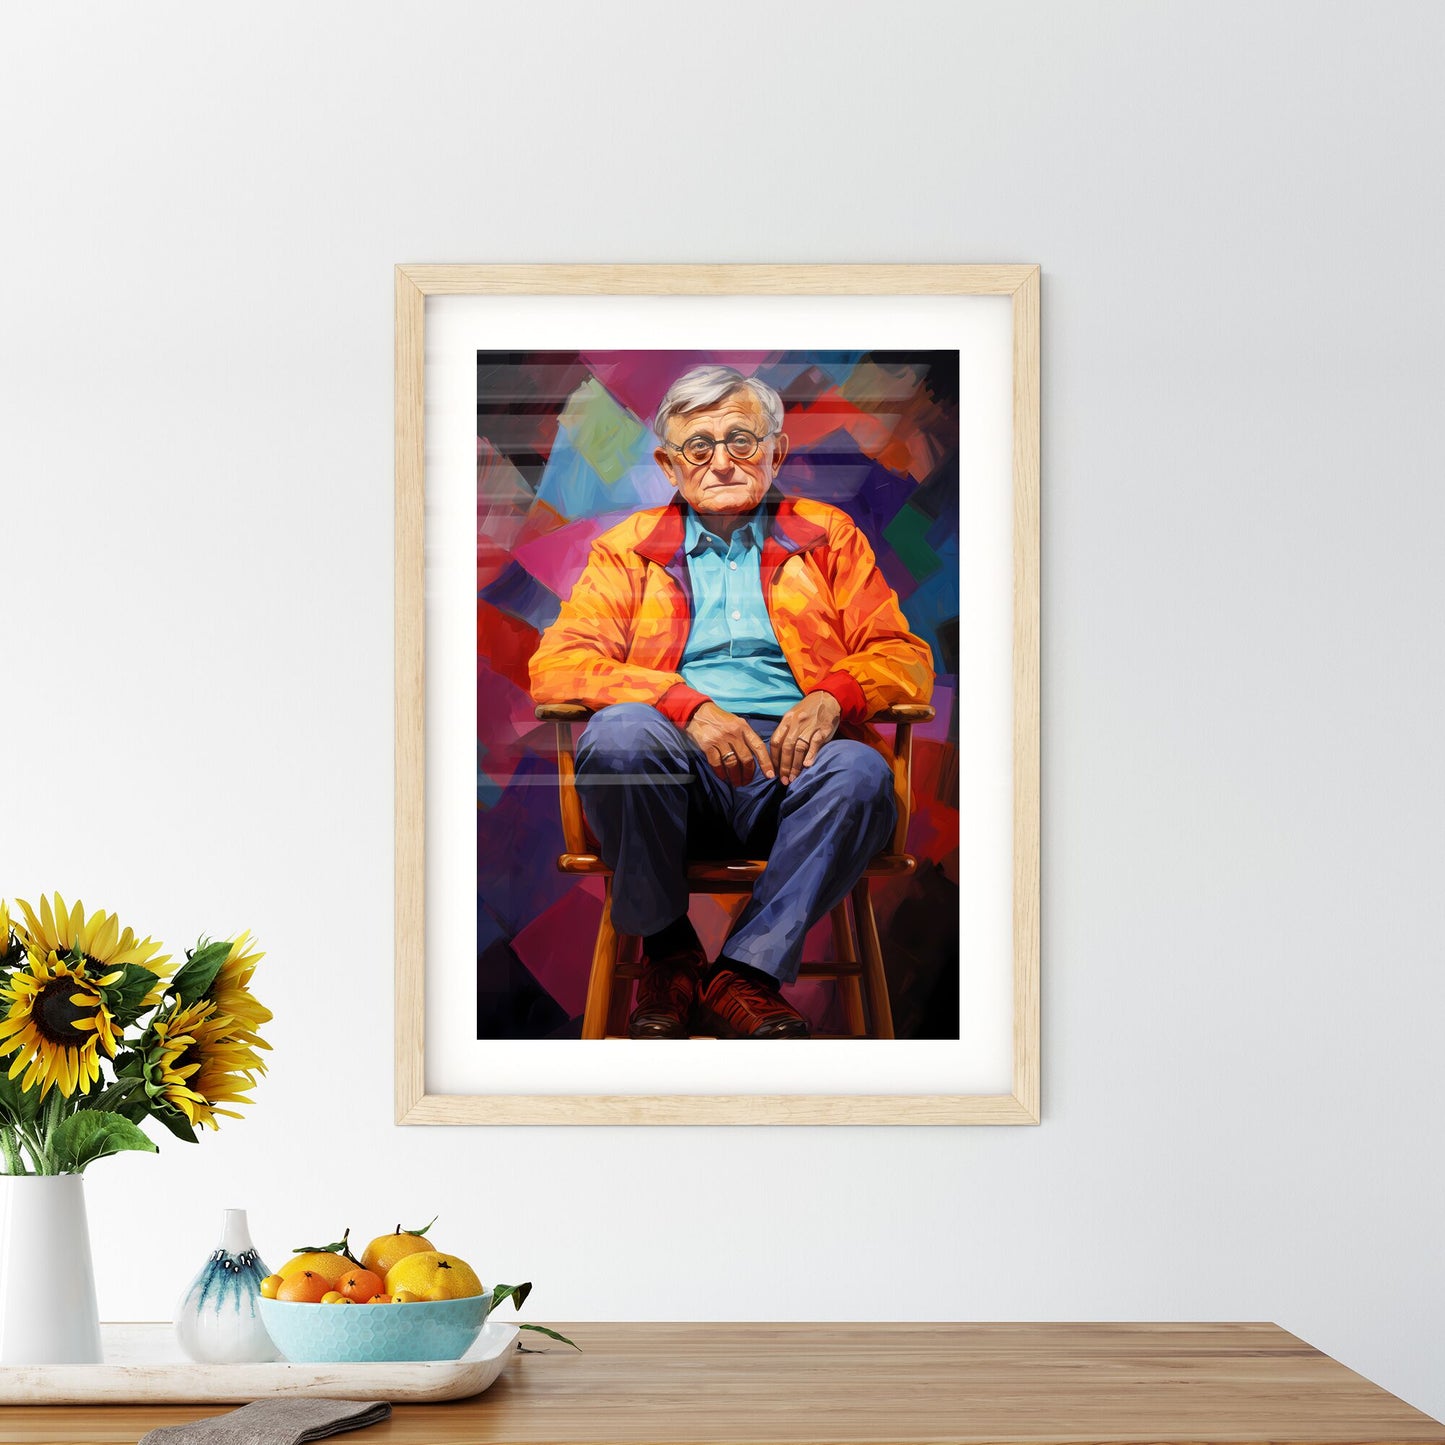 David Hockney - An Old Man Sitting In A Chair Default Title